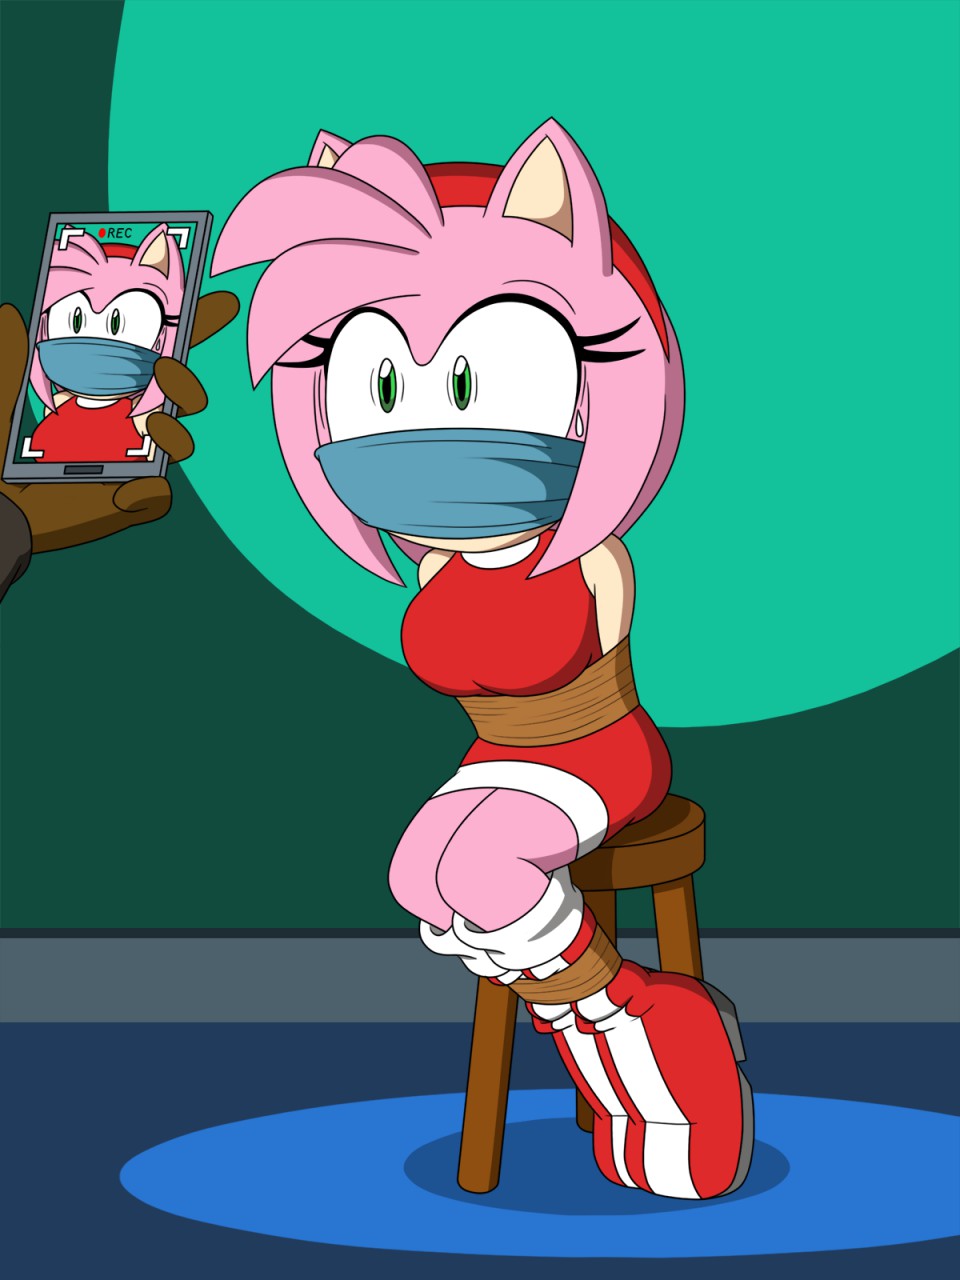 Amy rose tied up